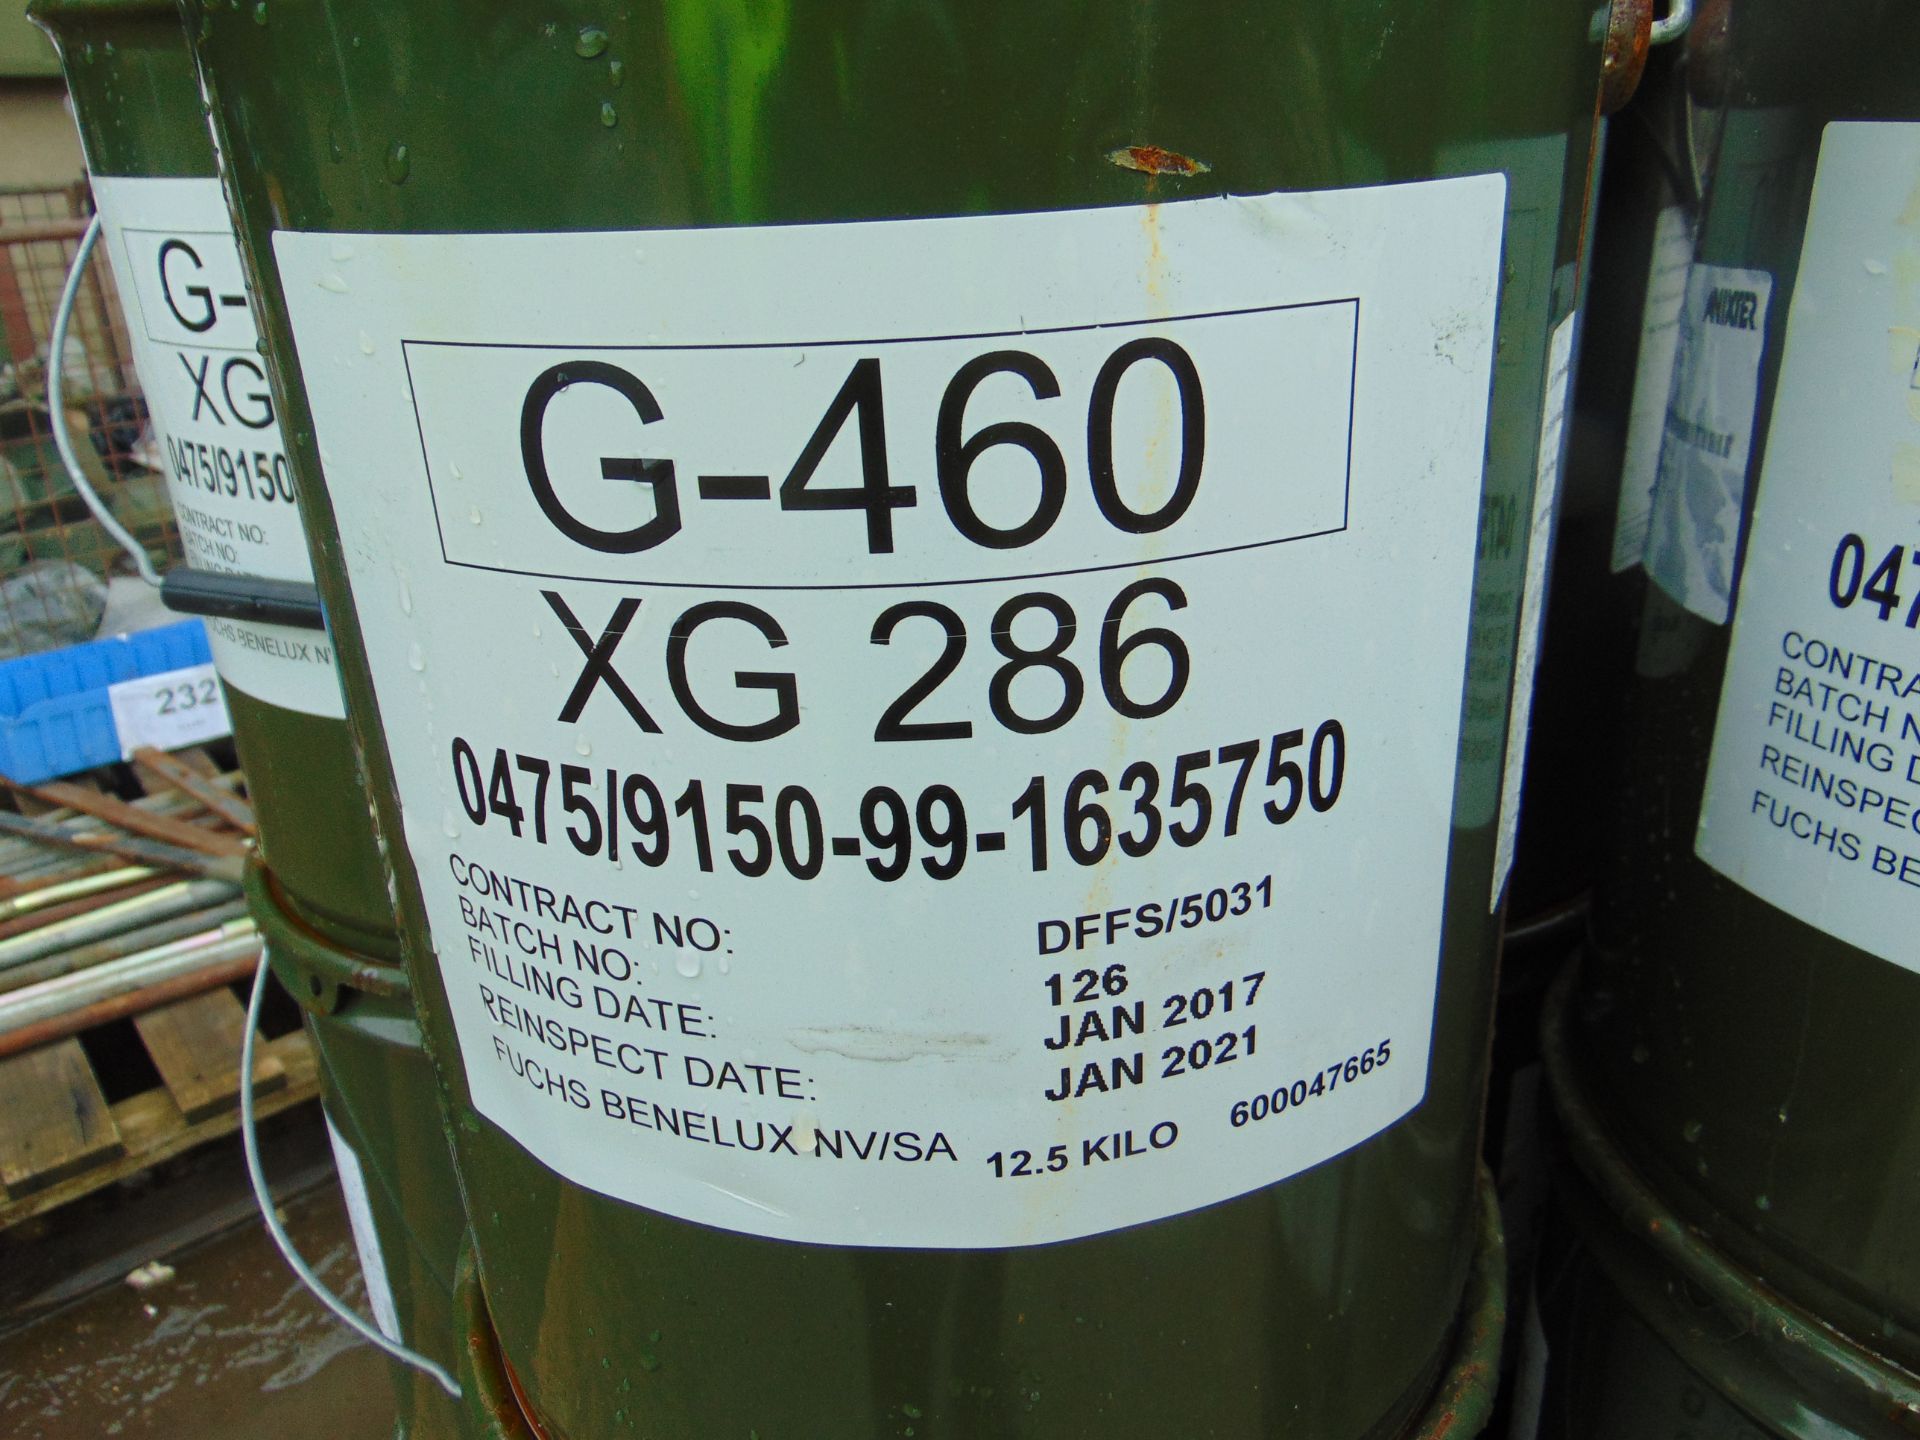 18 x 12.5 Kg Drums of G-460 XG-286 Marine Grease - Image 2 of 2